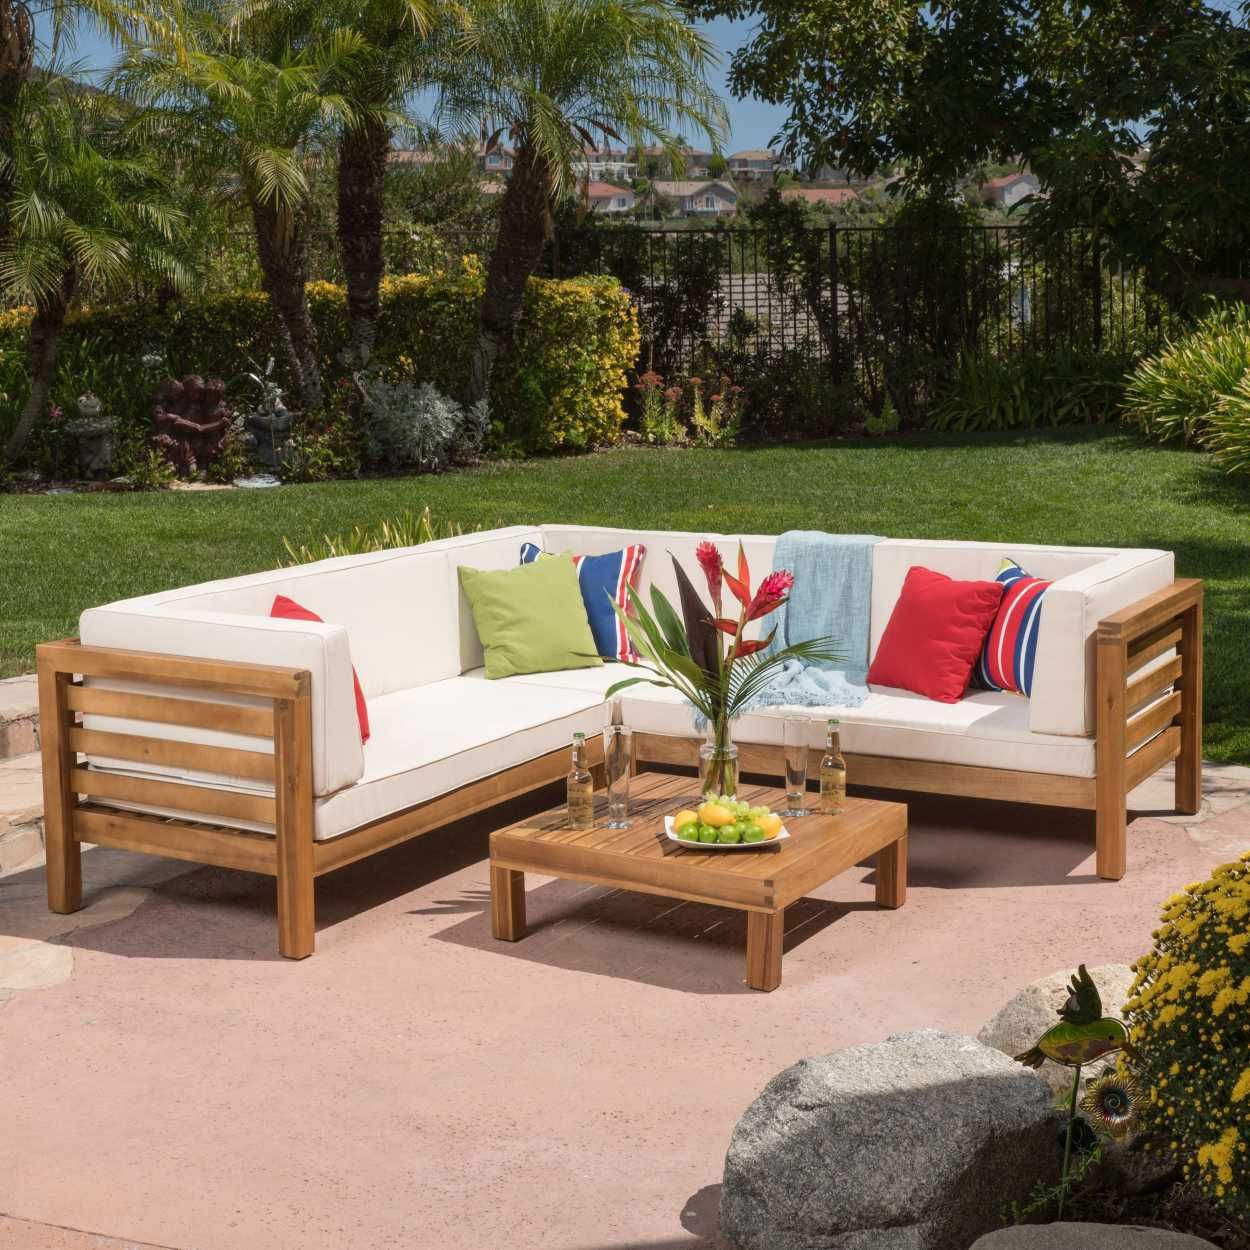 Cheap Patio Furniture Lovely Patio Furniture Cushion Sets ...